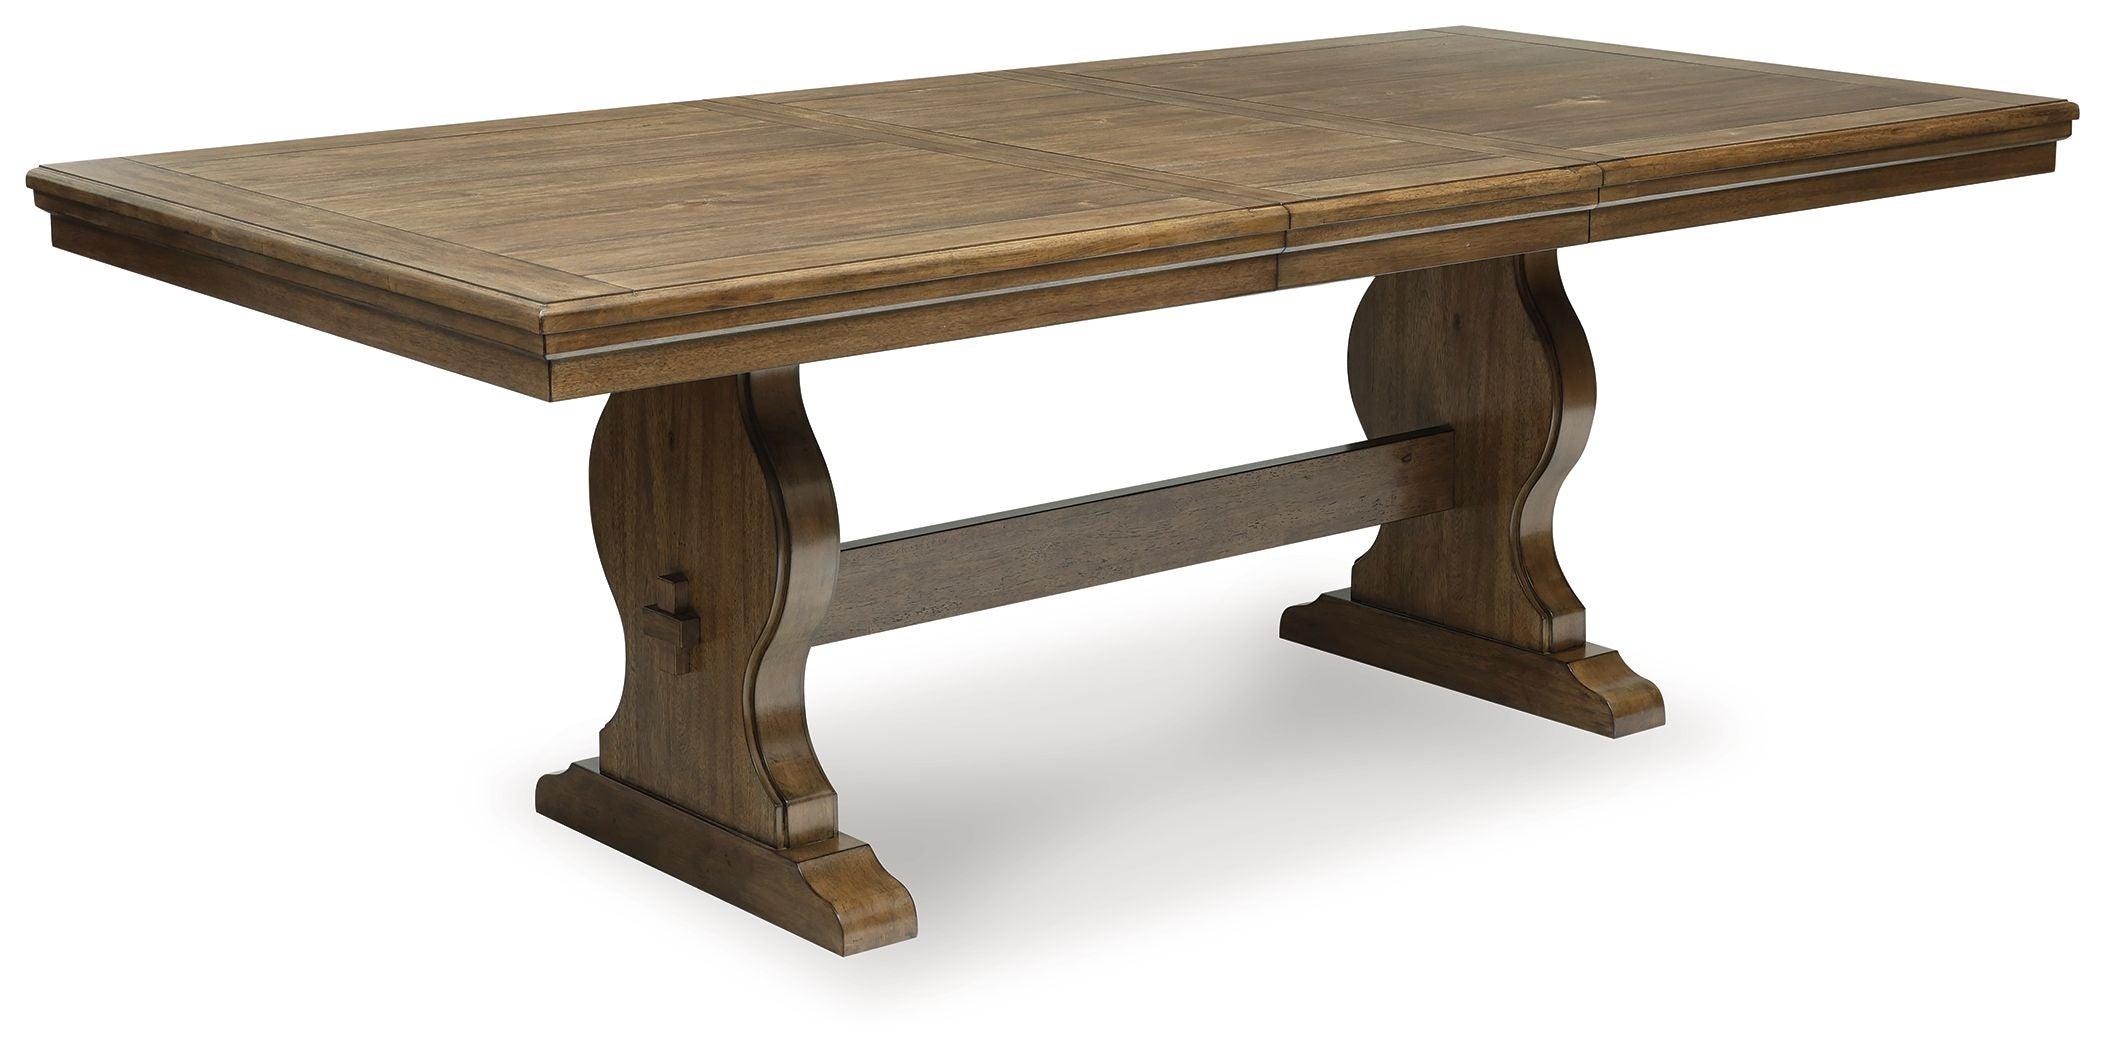 Benchcraft® - Sturlayne - Brown - Rectangular Dining Room Extension Table - 5th Avenue Furniture